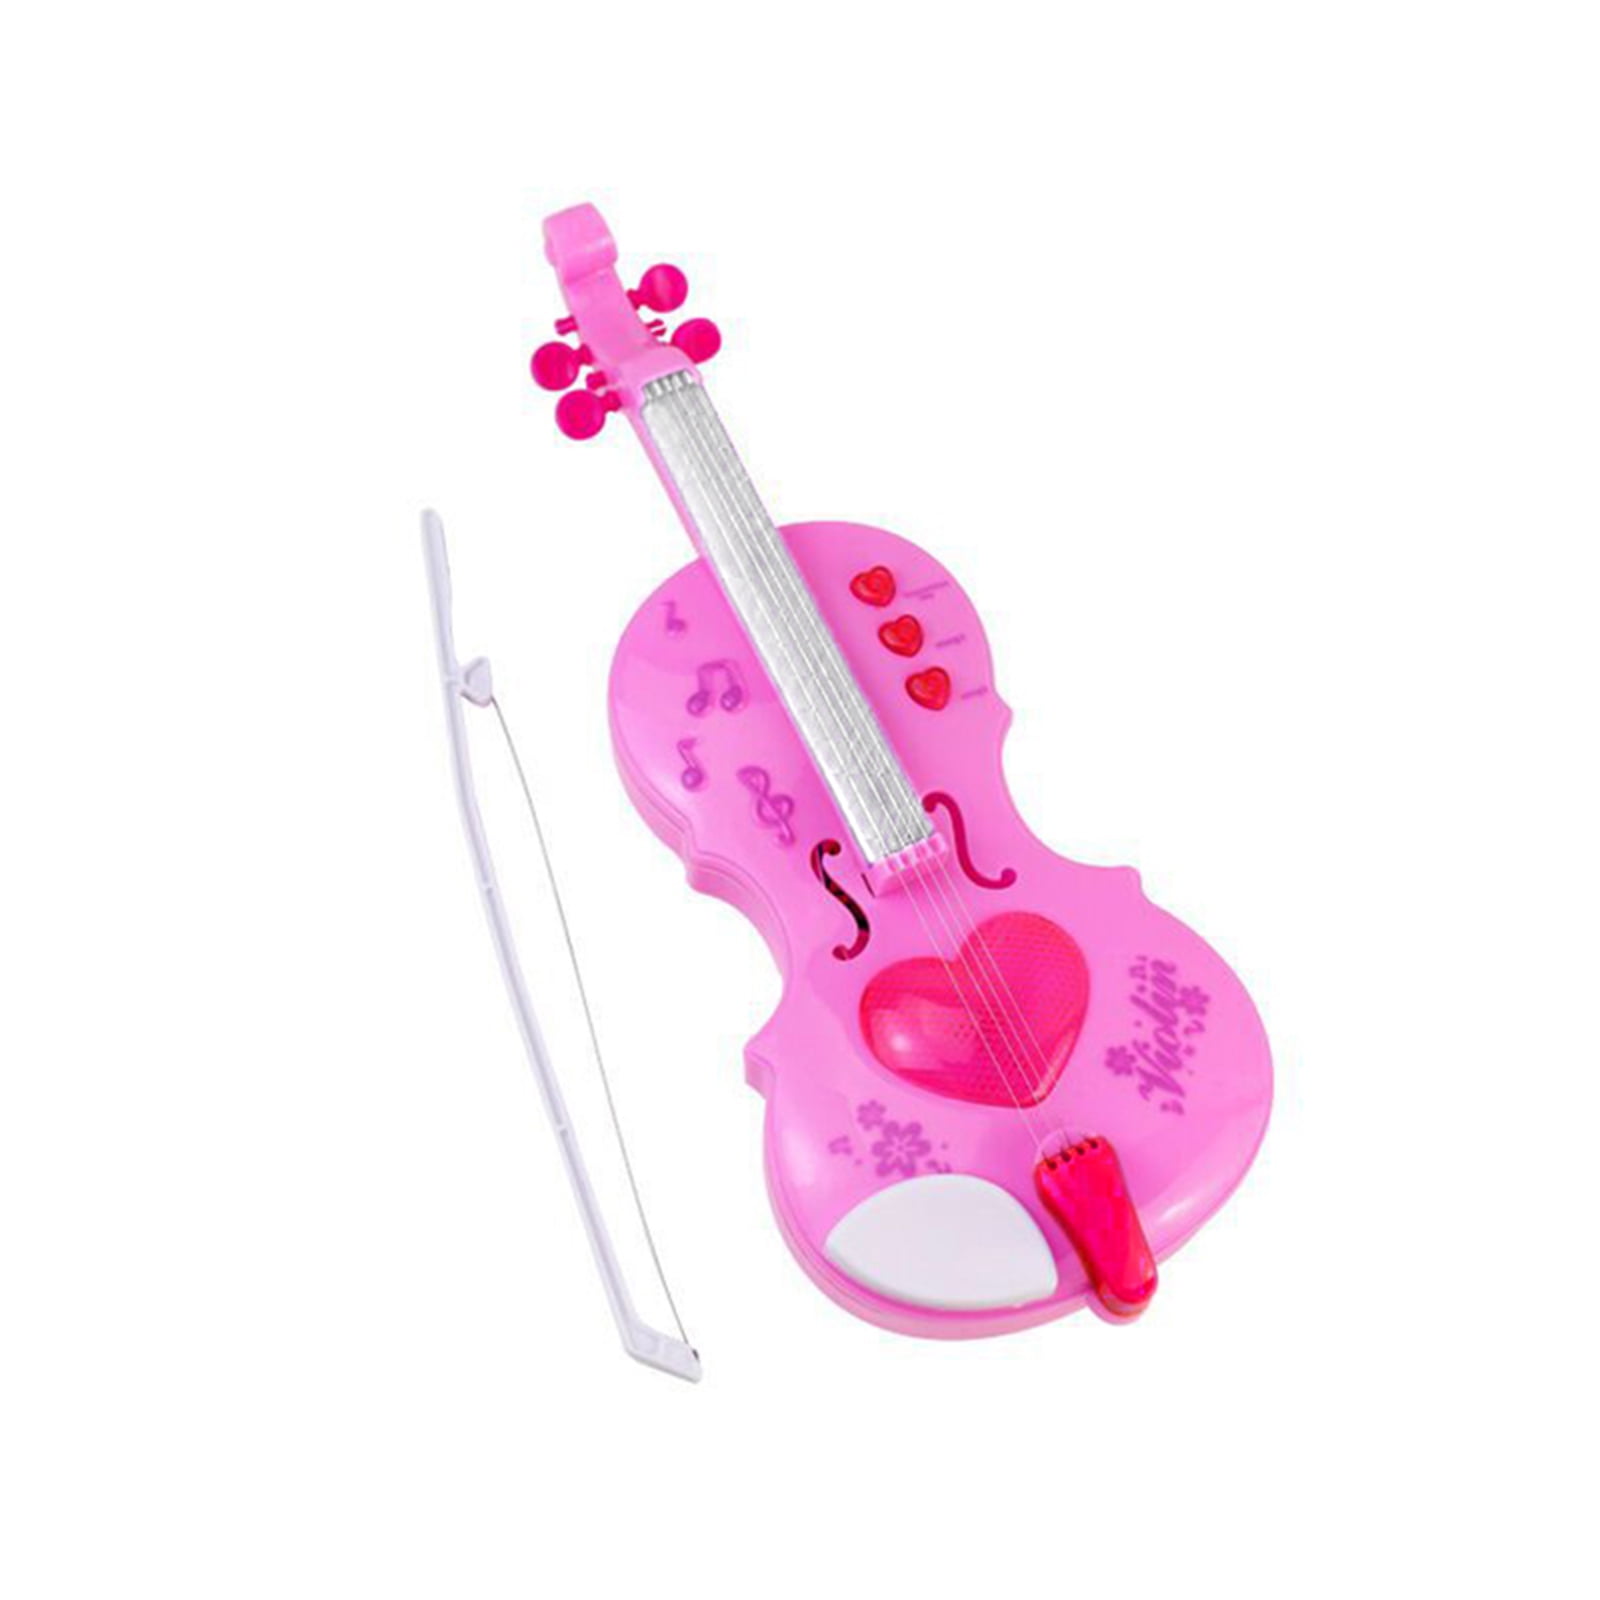 Simulated Violin Kids Childrens Musical String Instrument For Practice U0E8 Y7D2 